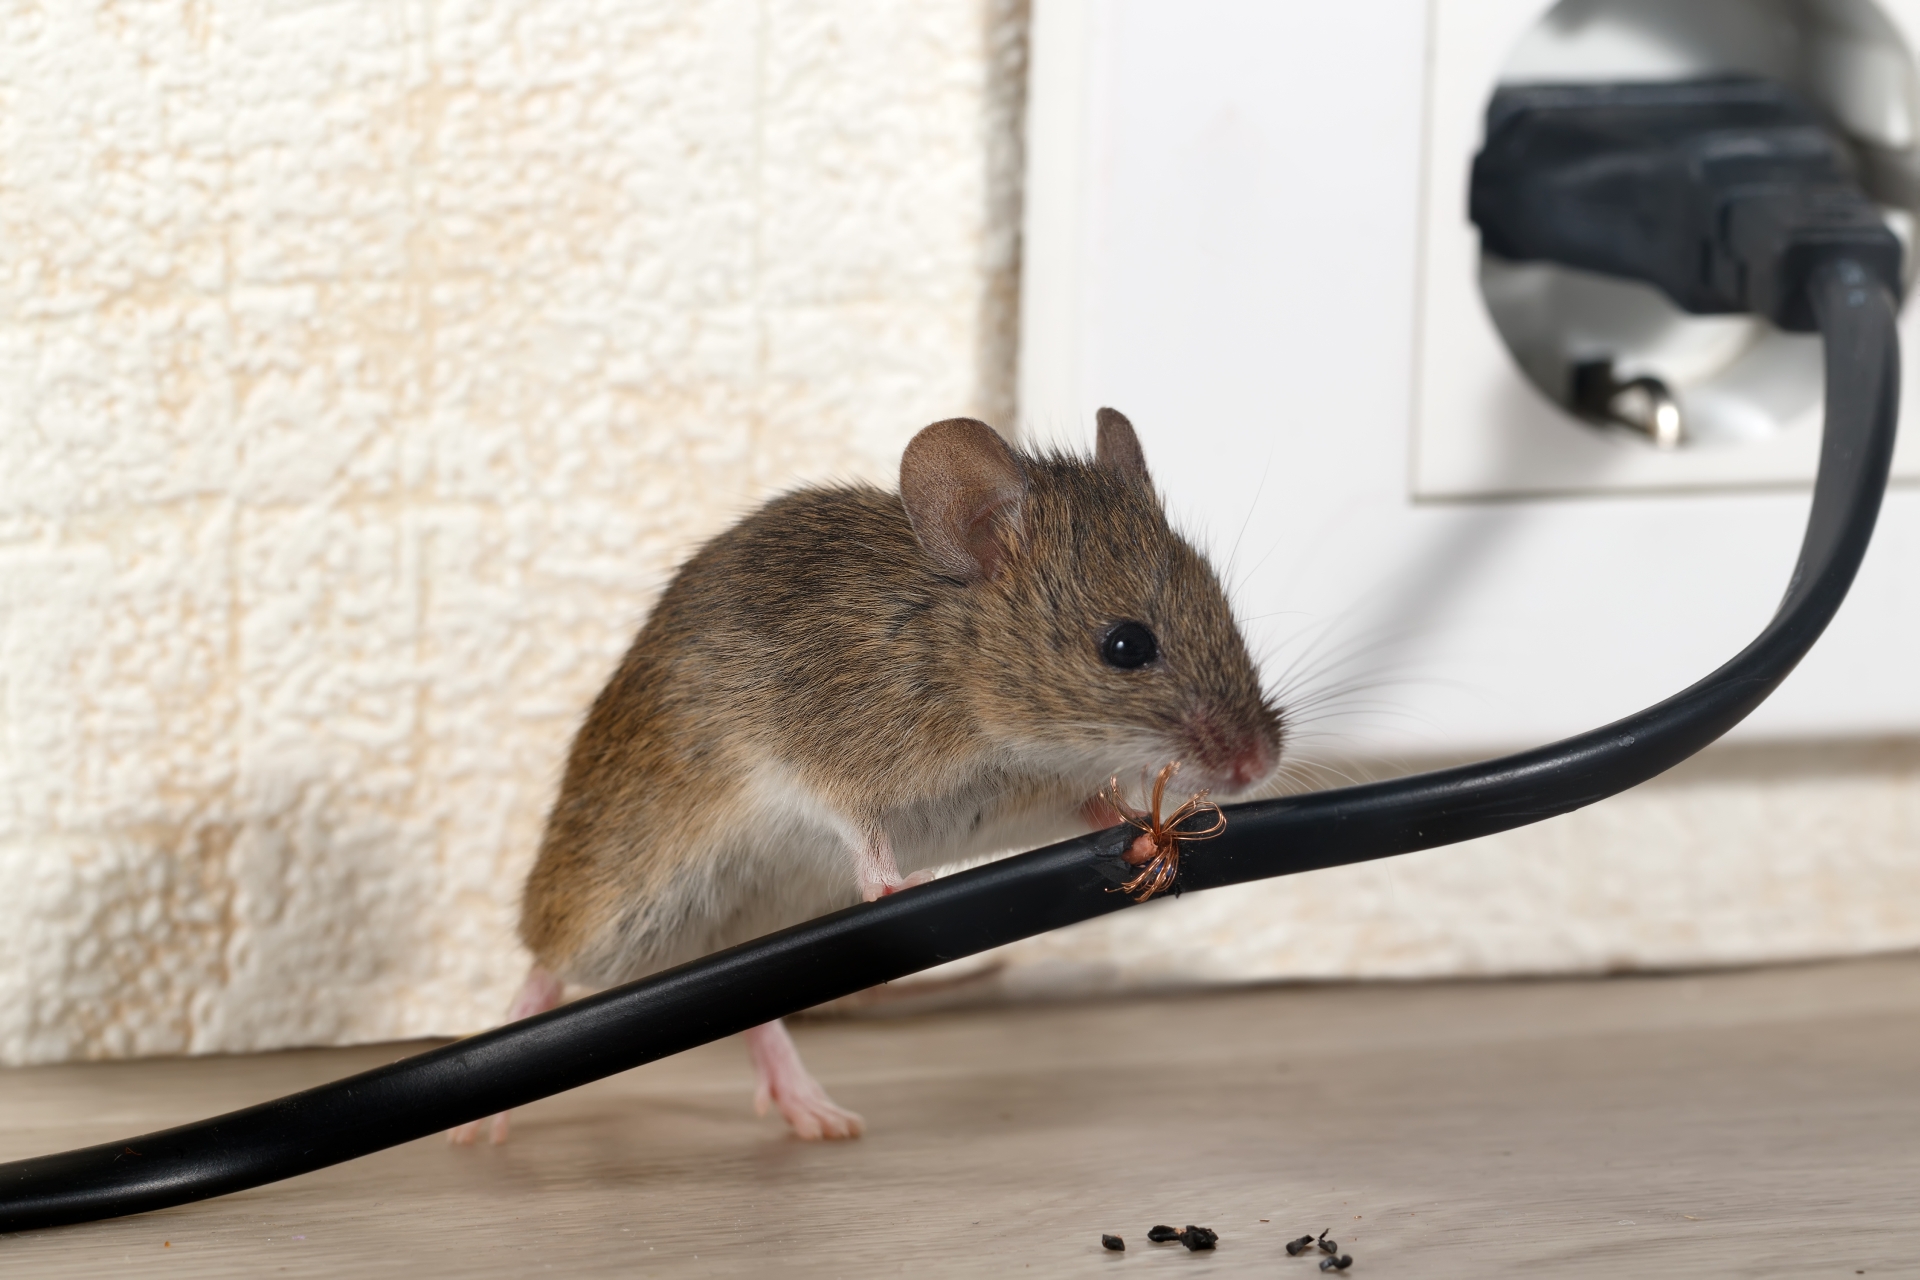 Mice Infestation, Pest Control in Egham, Englefield Green, TW20. Call Now 020 8166 9746